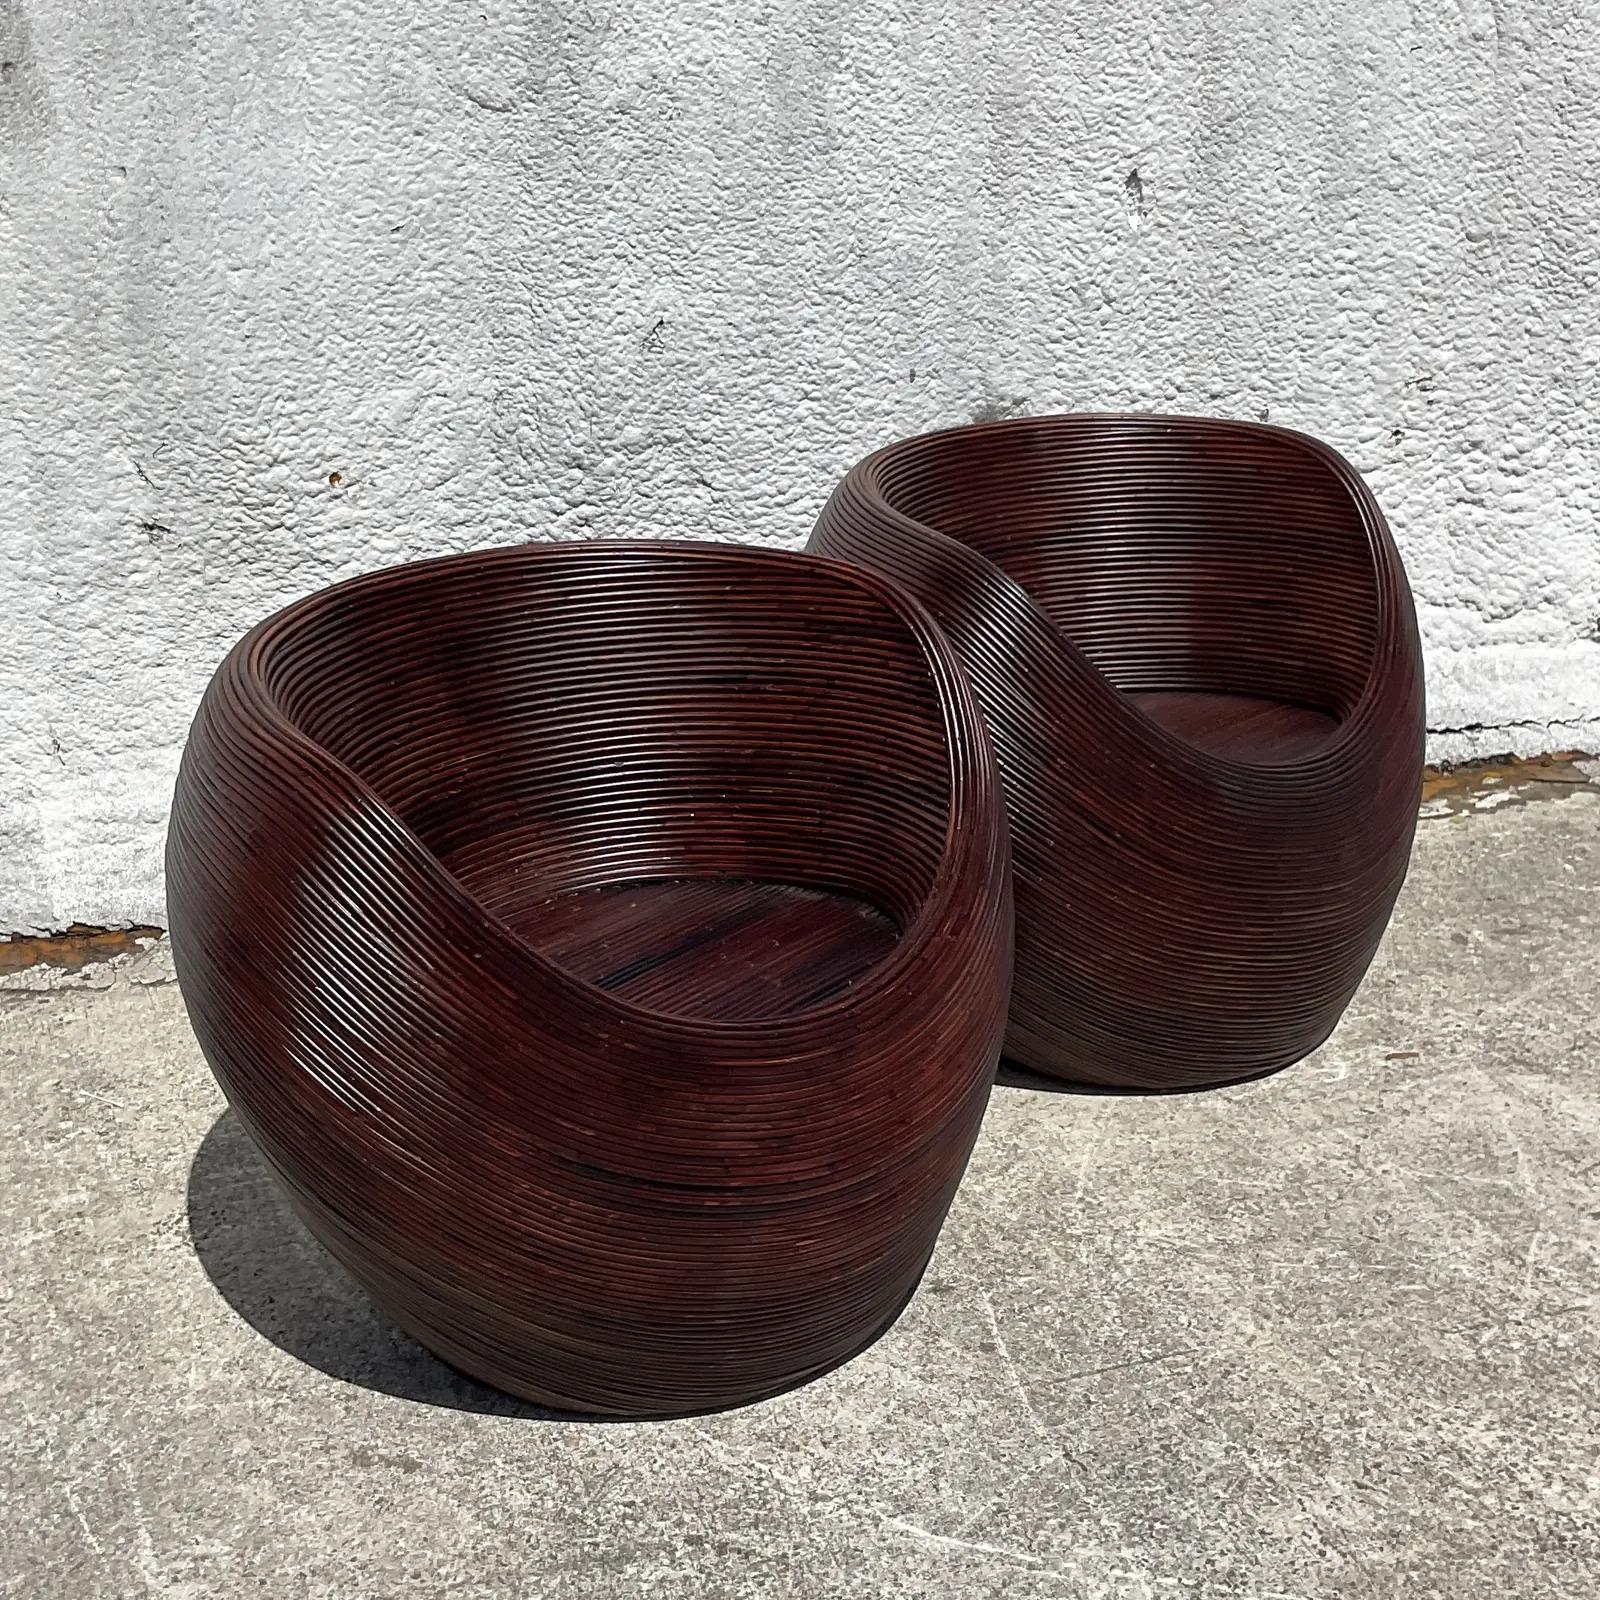 Fabulous pair of vintage Coastal lounge chairs. The iconic pod chair design made in coiled pencil reed. A rich brown color with a gloss finish. Acquired from a Palm Beach estate.